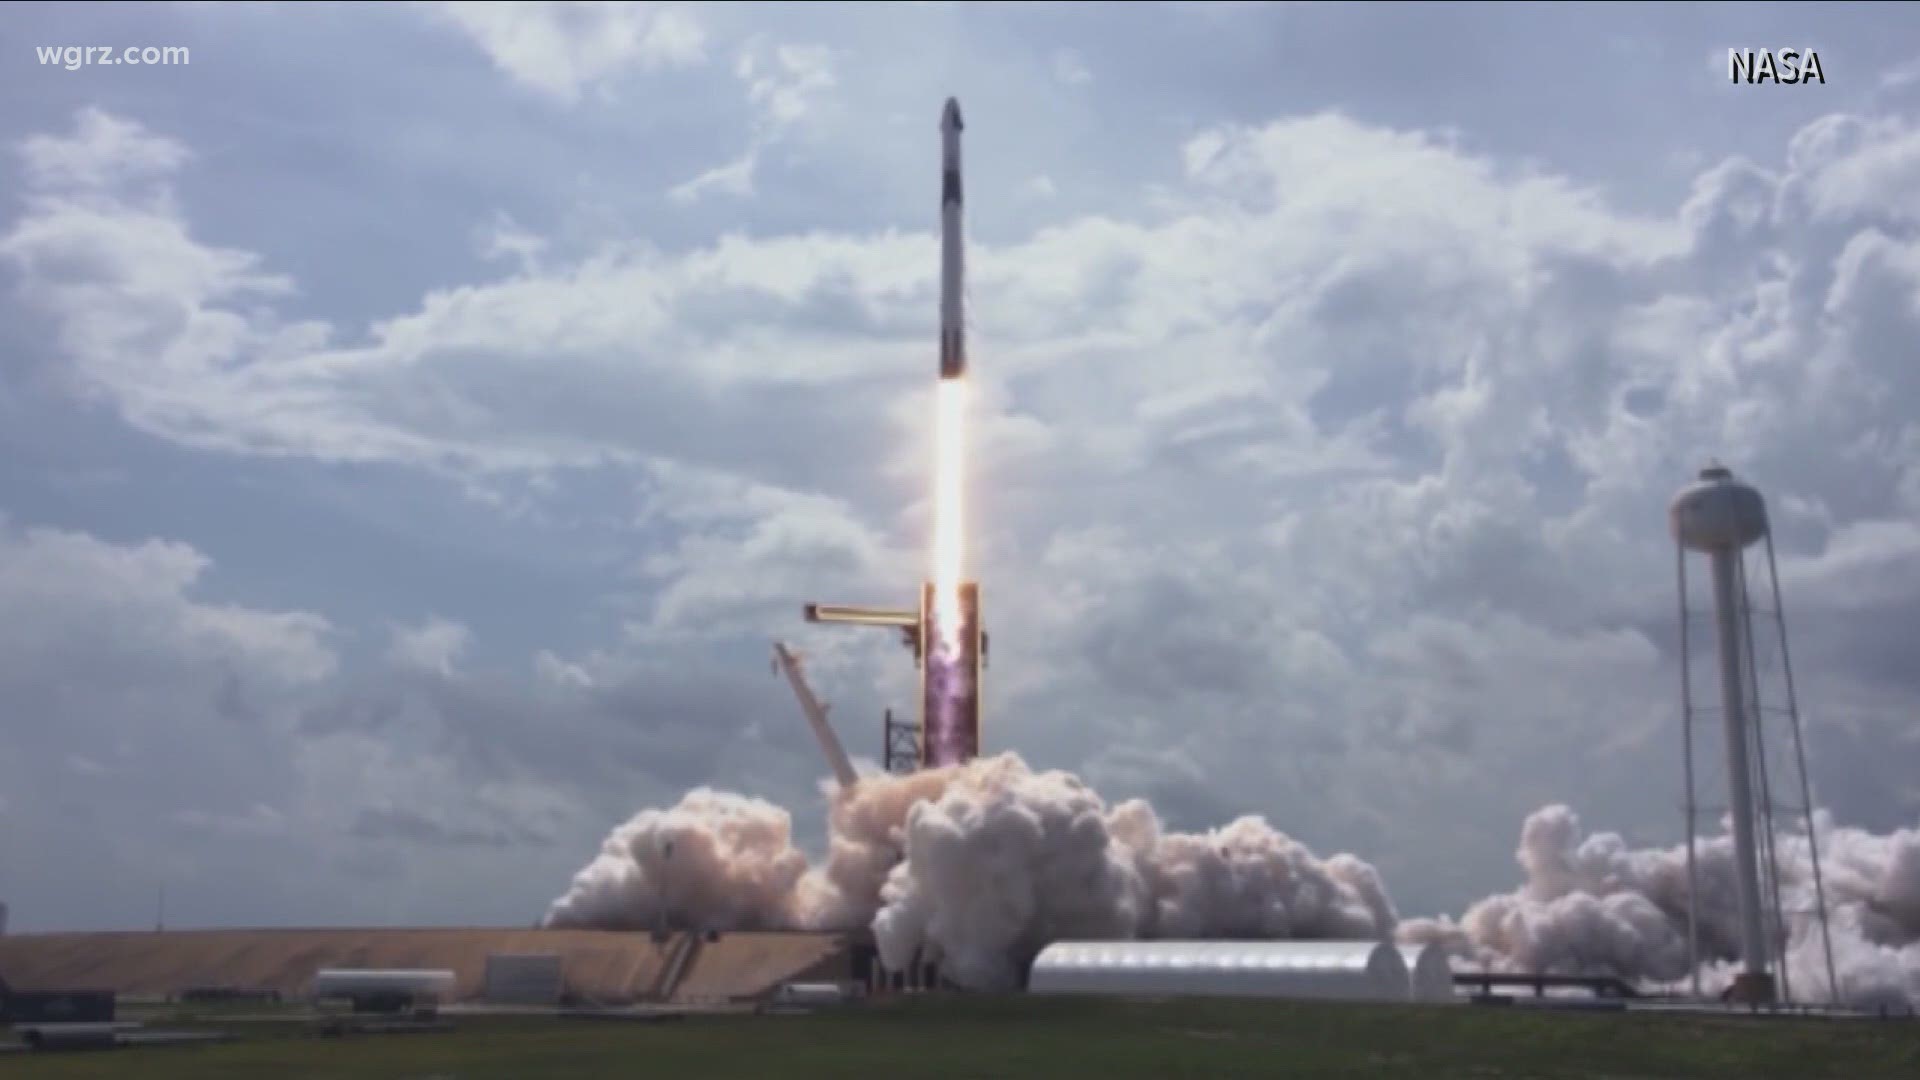 NASA and SpaceX are joining forces to launch what's being called 'Crew 1.' It's the first fully-crewed commercial mission to the International Space Station.